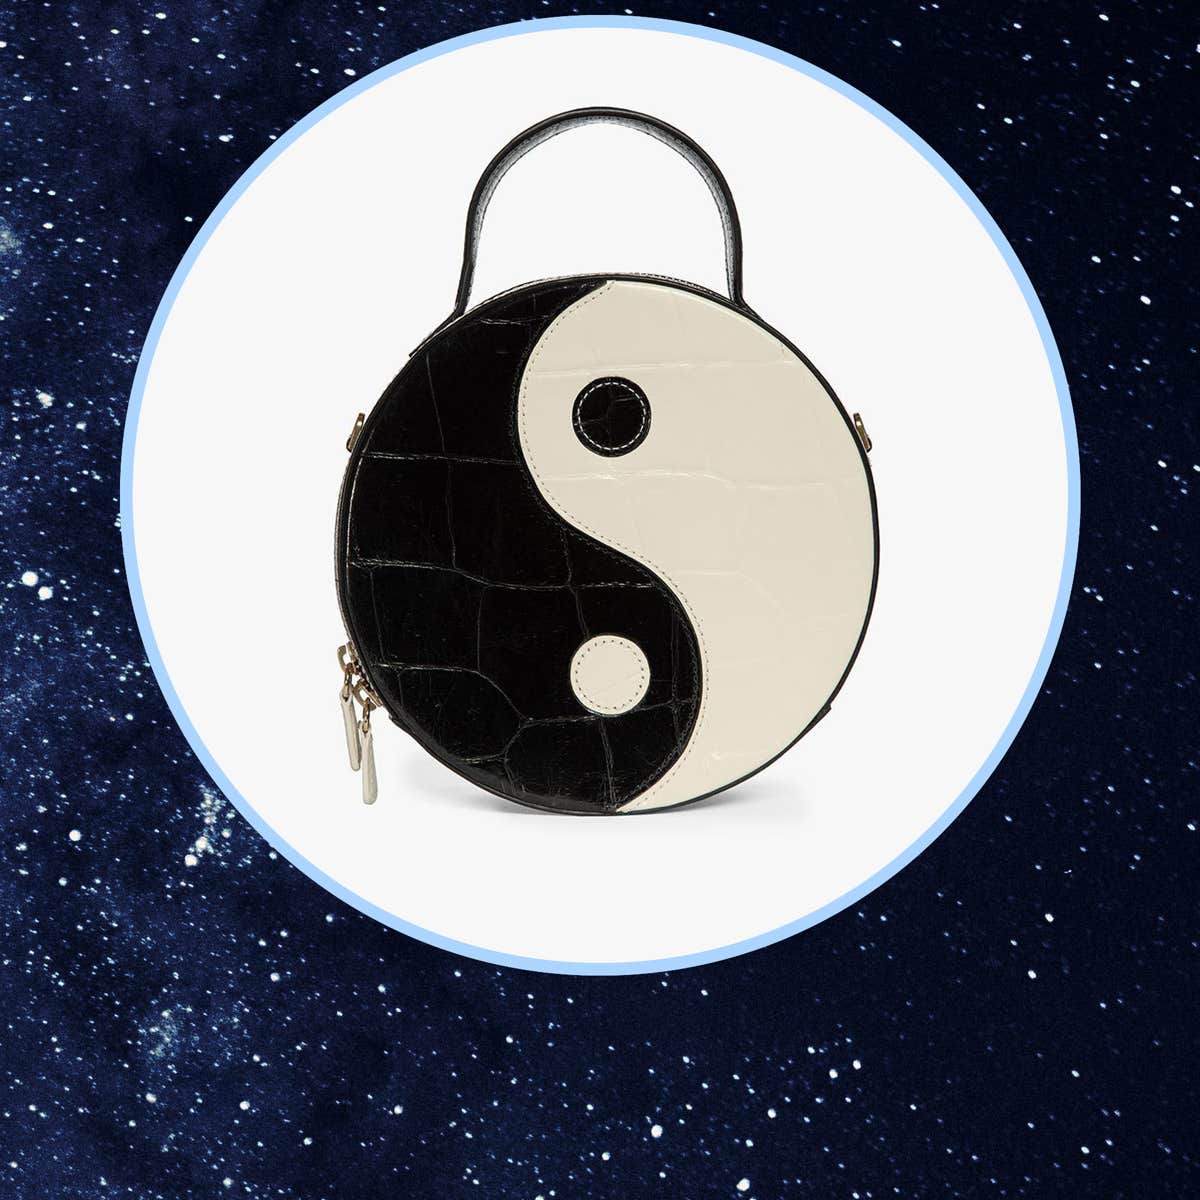 Why The Yin Yang Symbol Became A Trending Beacon Of